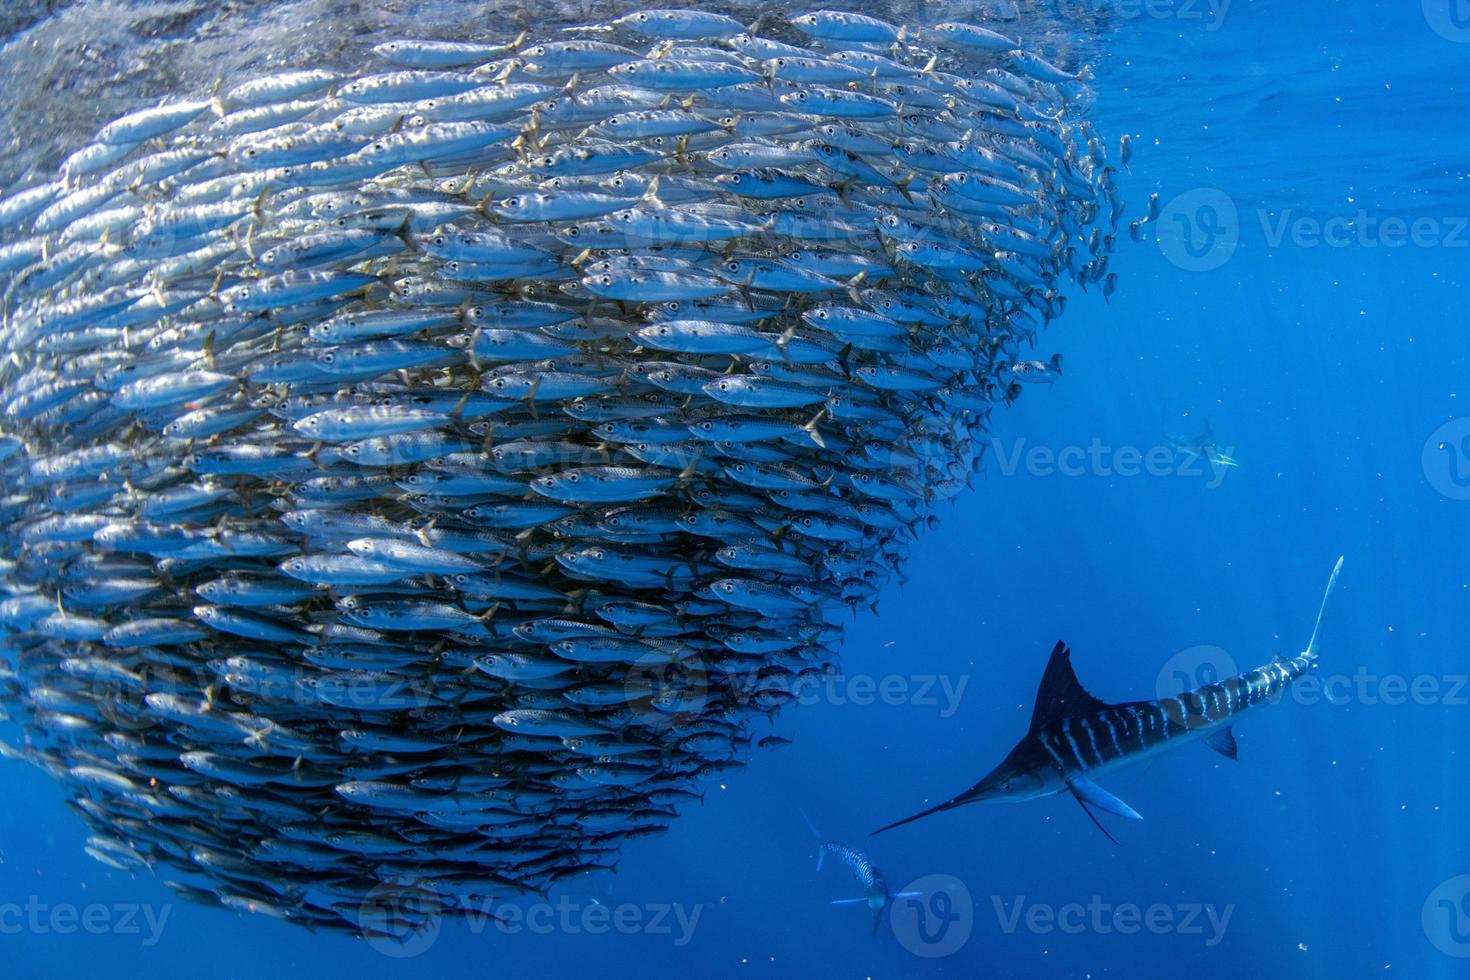 Striped marlin and sea lion hunting in sardine bait ball in pacific ocean photo